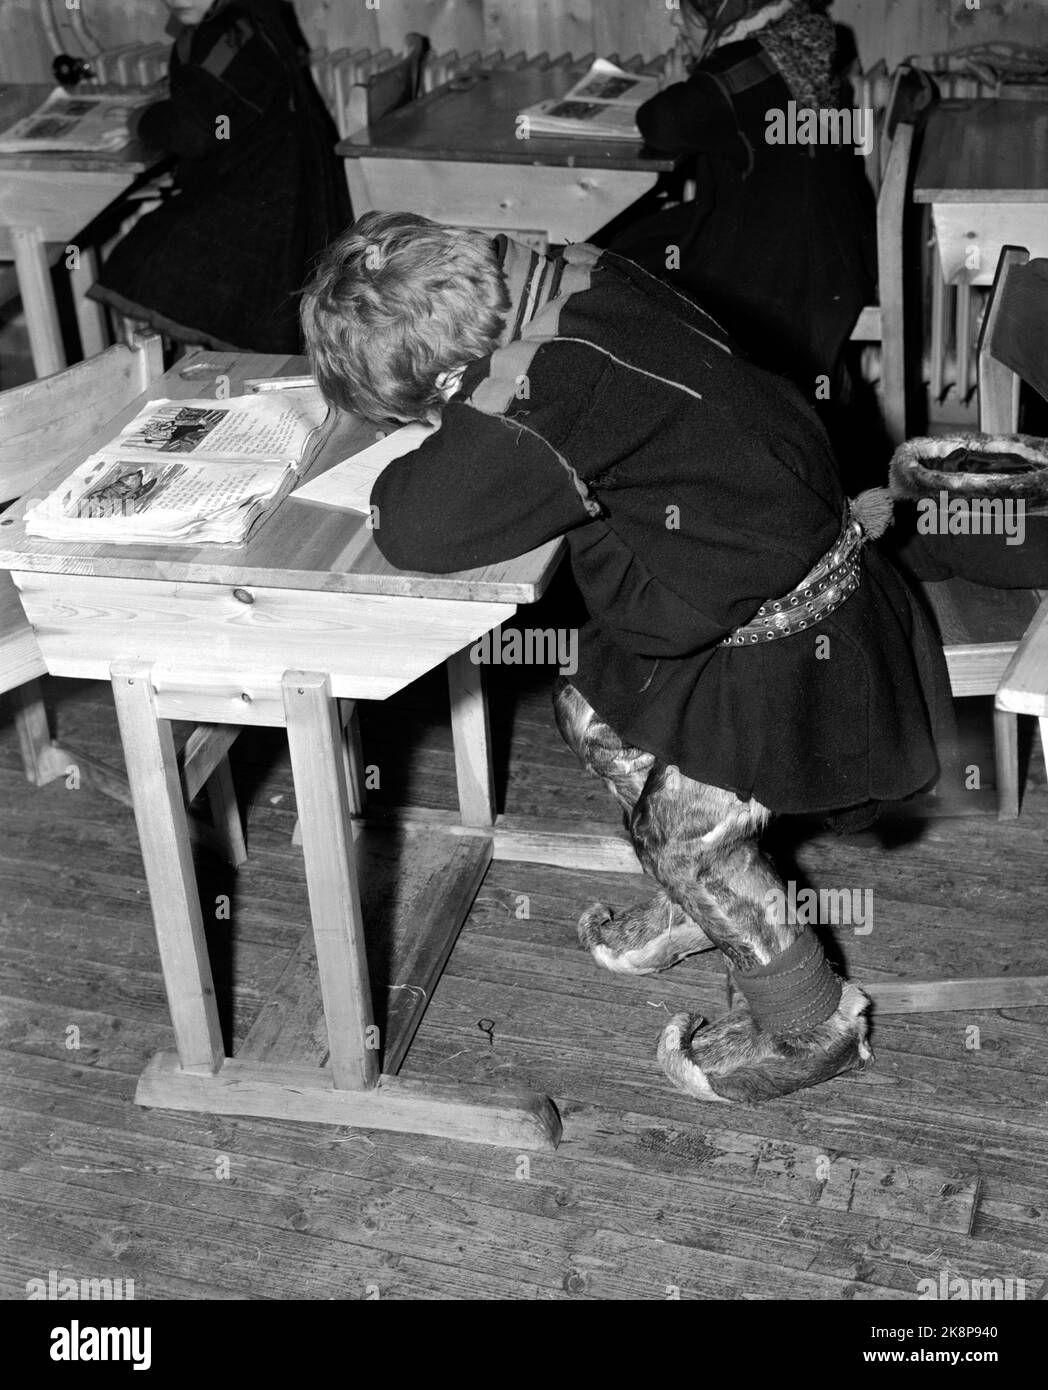 Karasjok, Finnmark, January 1950. From the boarding school for moving-side children. The Sami children live at boarding school. Here interiors from a classroom. For the Sami children, sitting on a chair and having your legs on the floor is a big transition. This boy struggles to adapt to life at the school desk. Photo: SV. A. Børretzen / Current / NTB Stock Photo